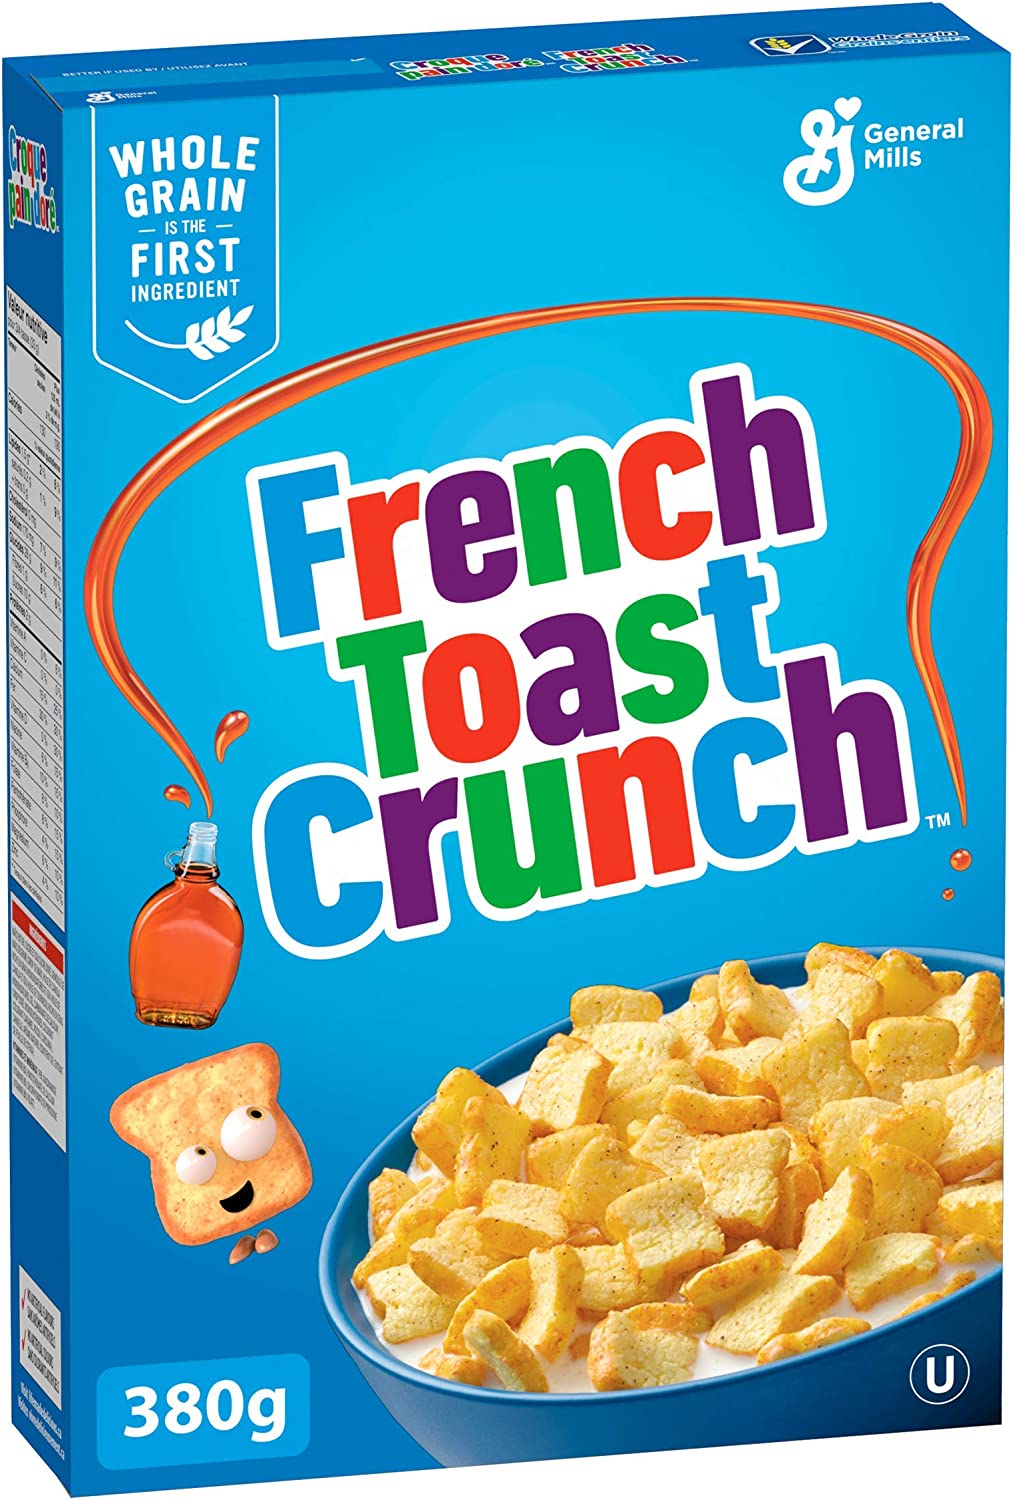 General Mills - French Toast Crunch Cereal 380g